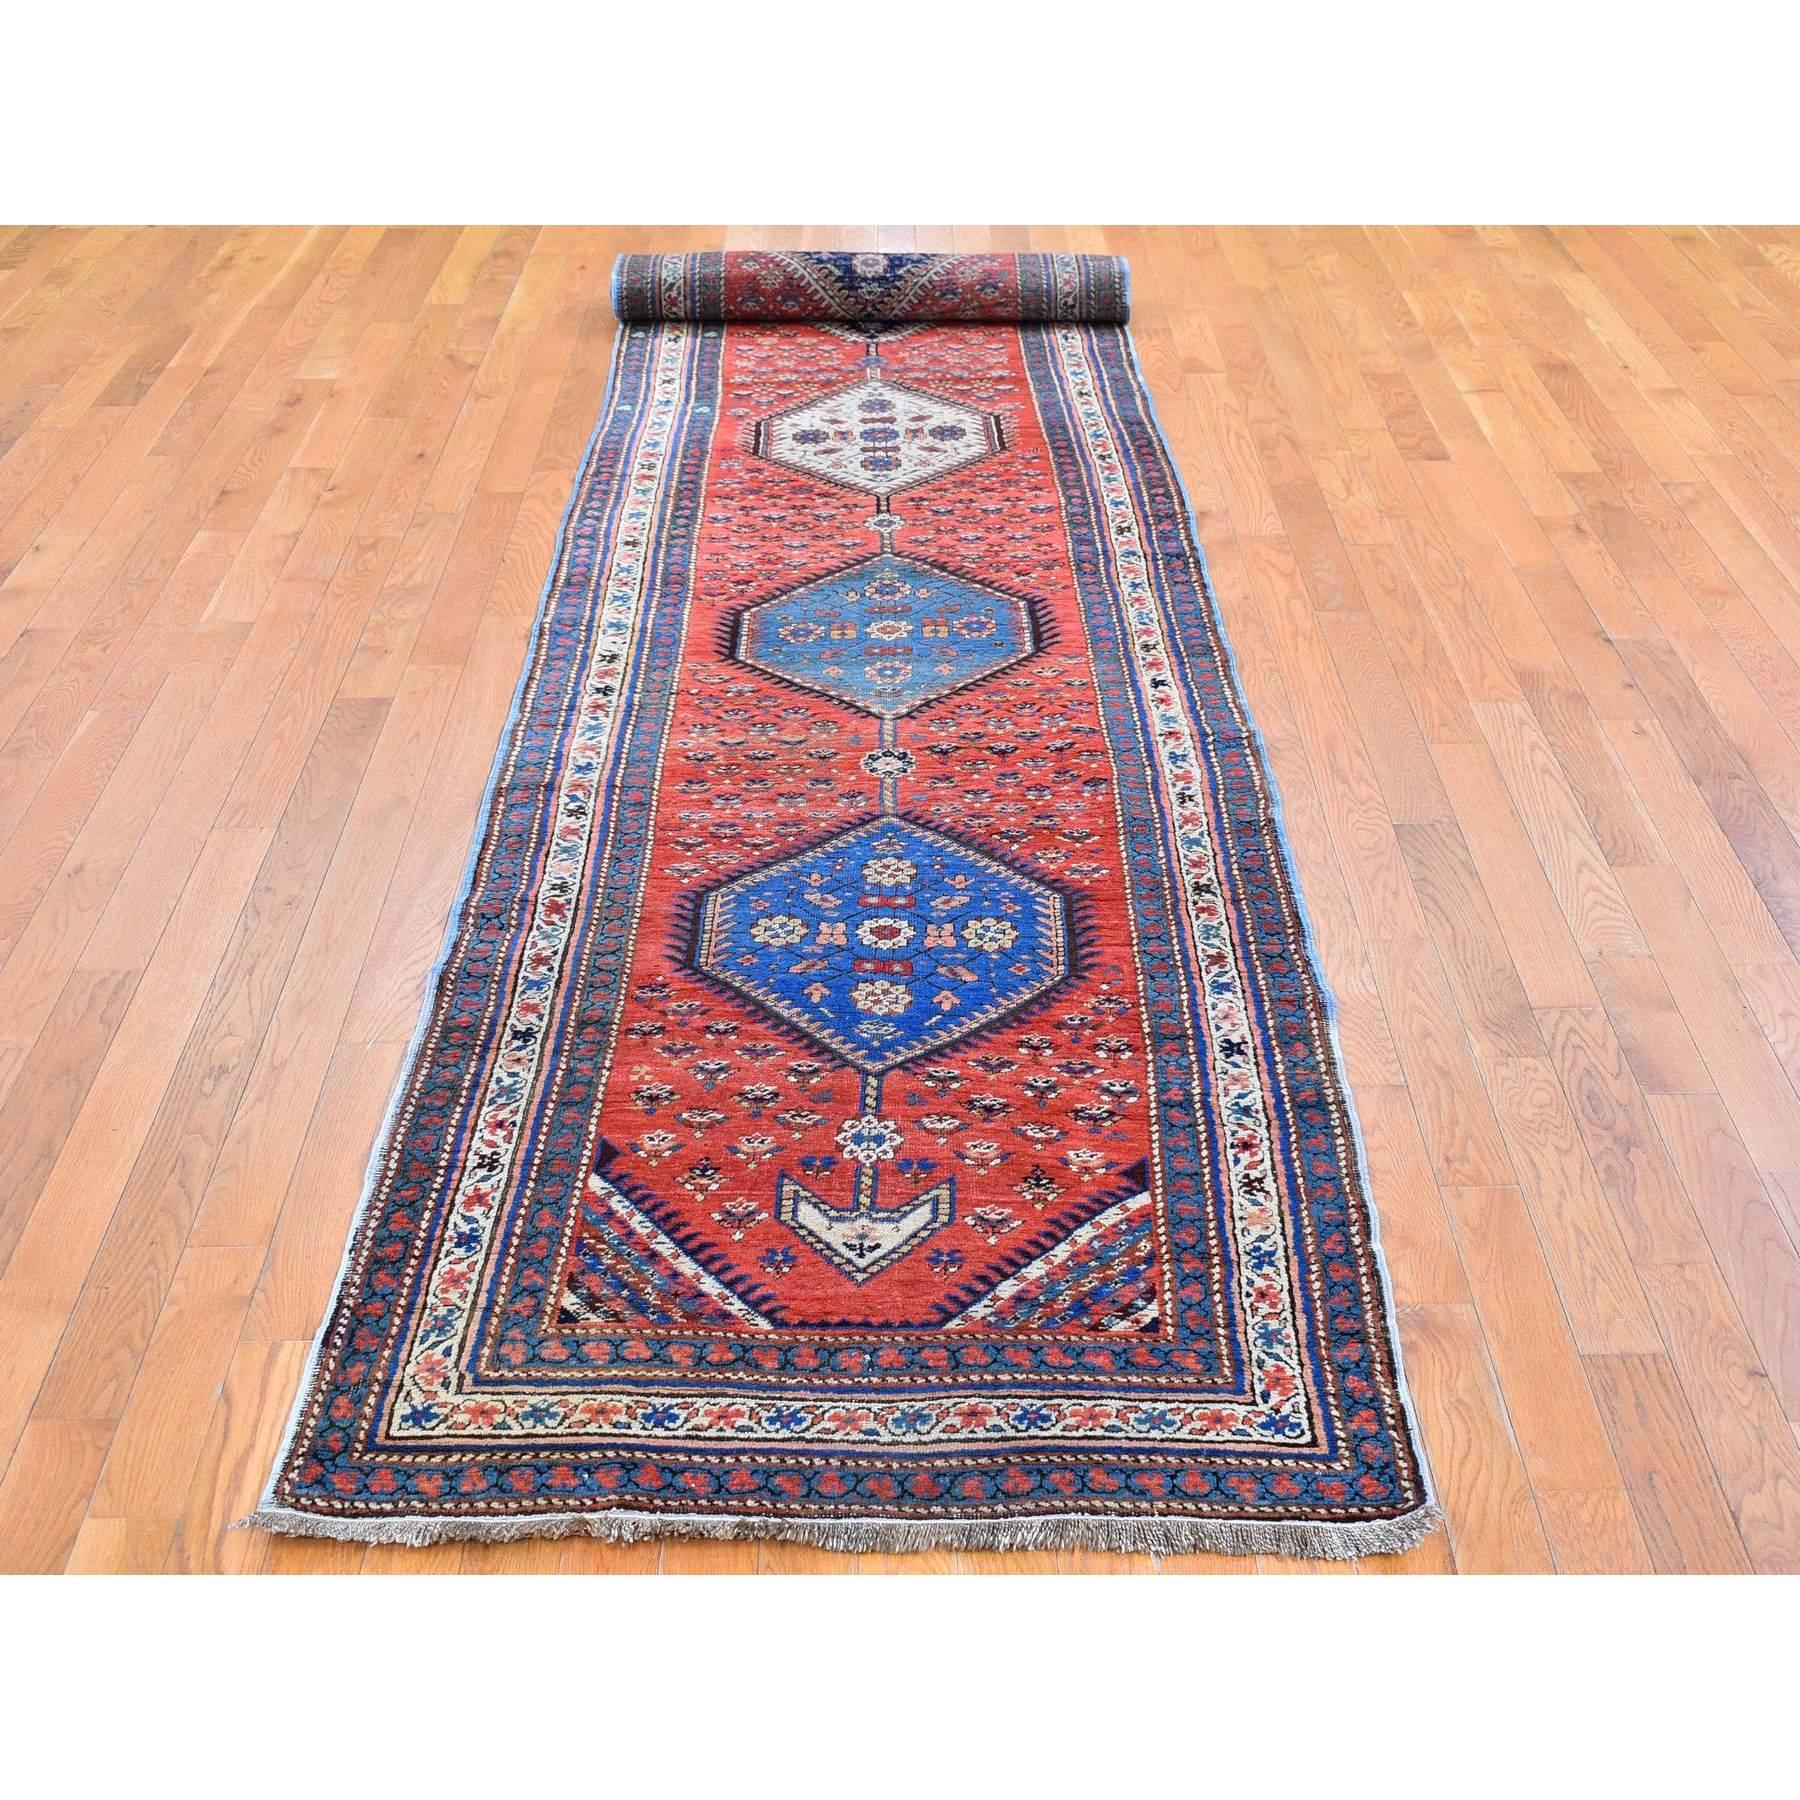 This fabulous antique Persian Bakshaish XL runner good condition serrated anchored medallions design pure wool terracotta hand knotted oriental carpet has been created and designed for extra strength and durability. this rug has been handcrafted for